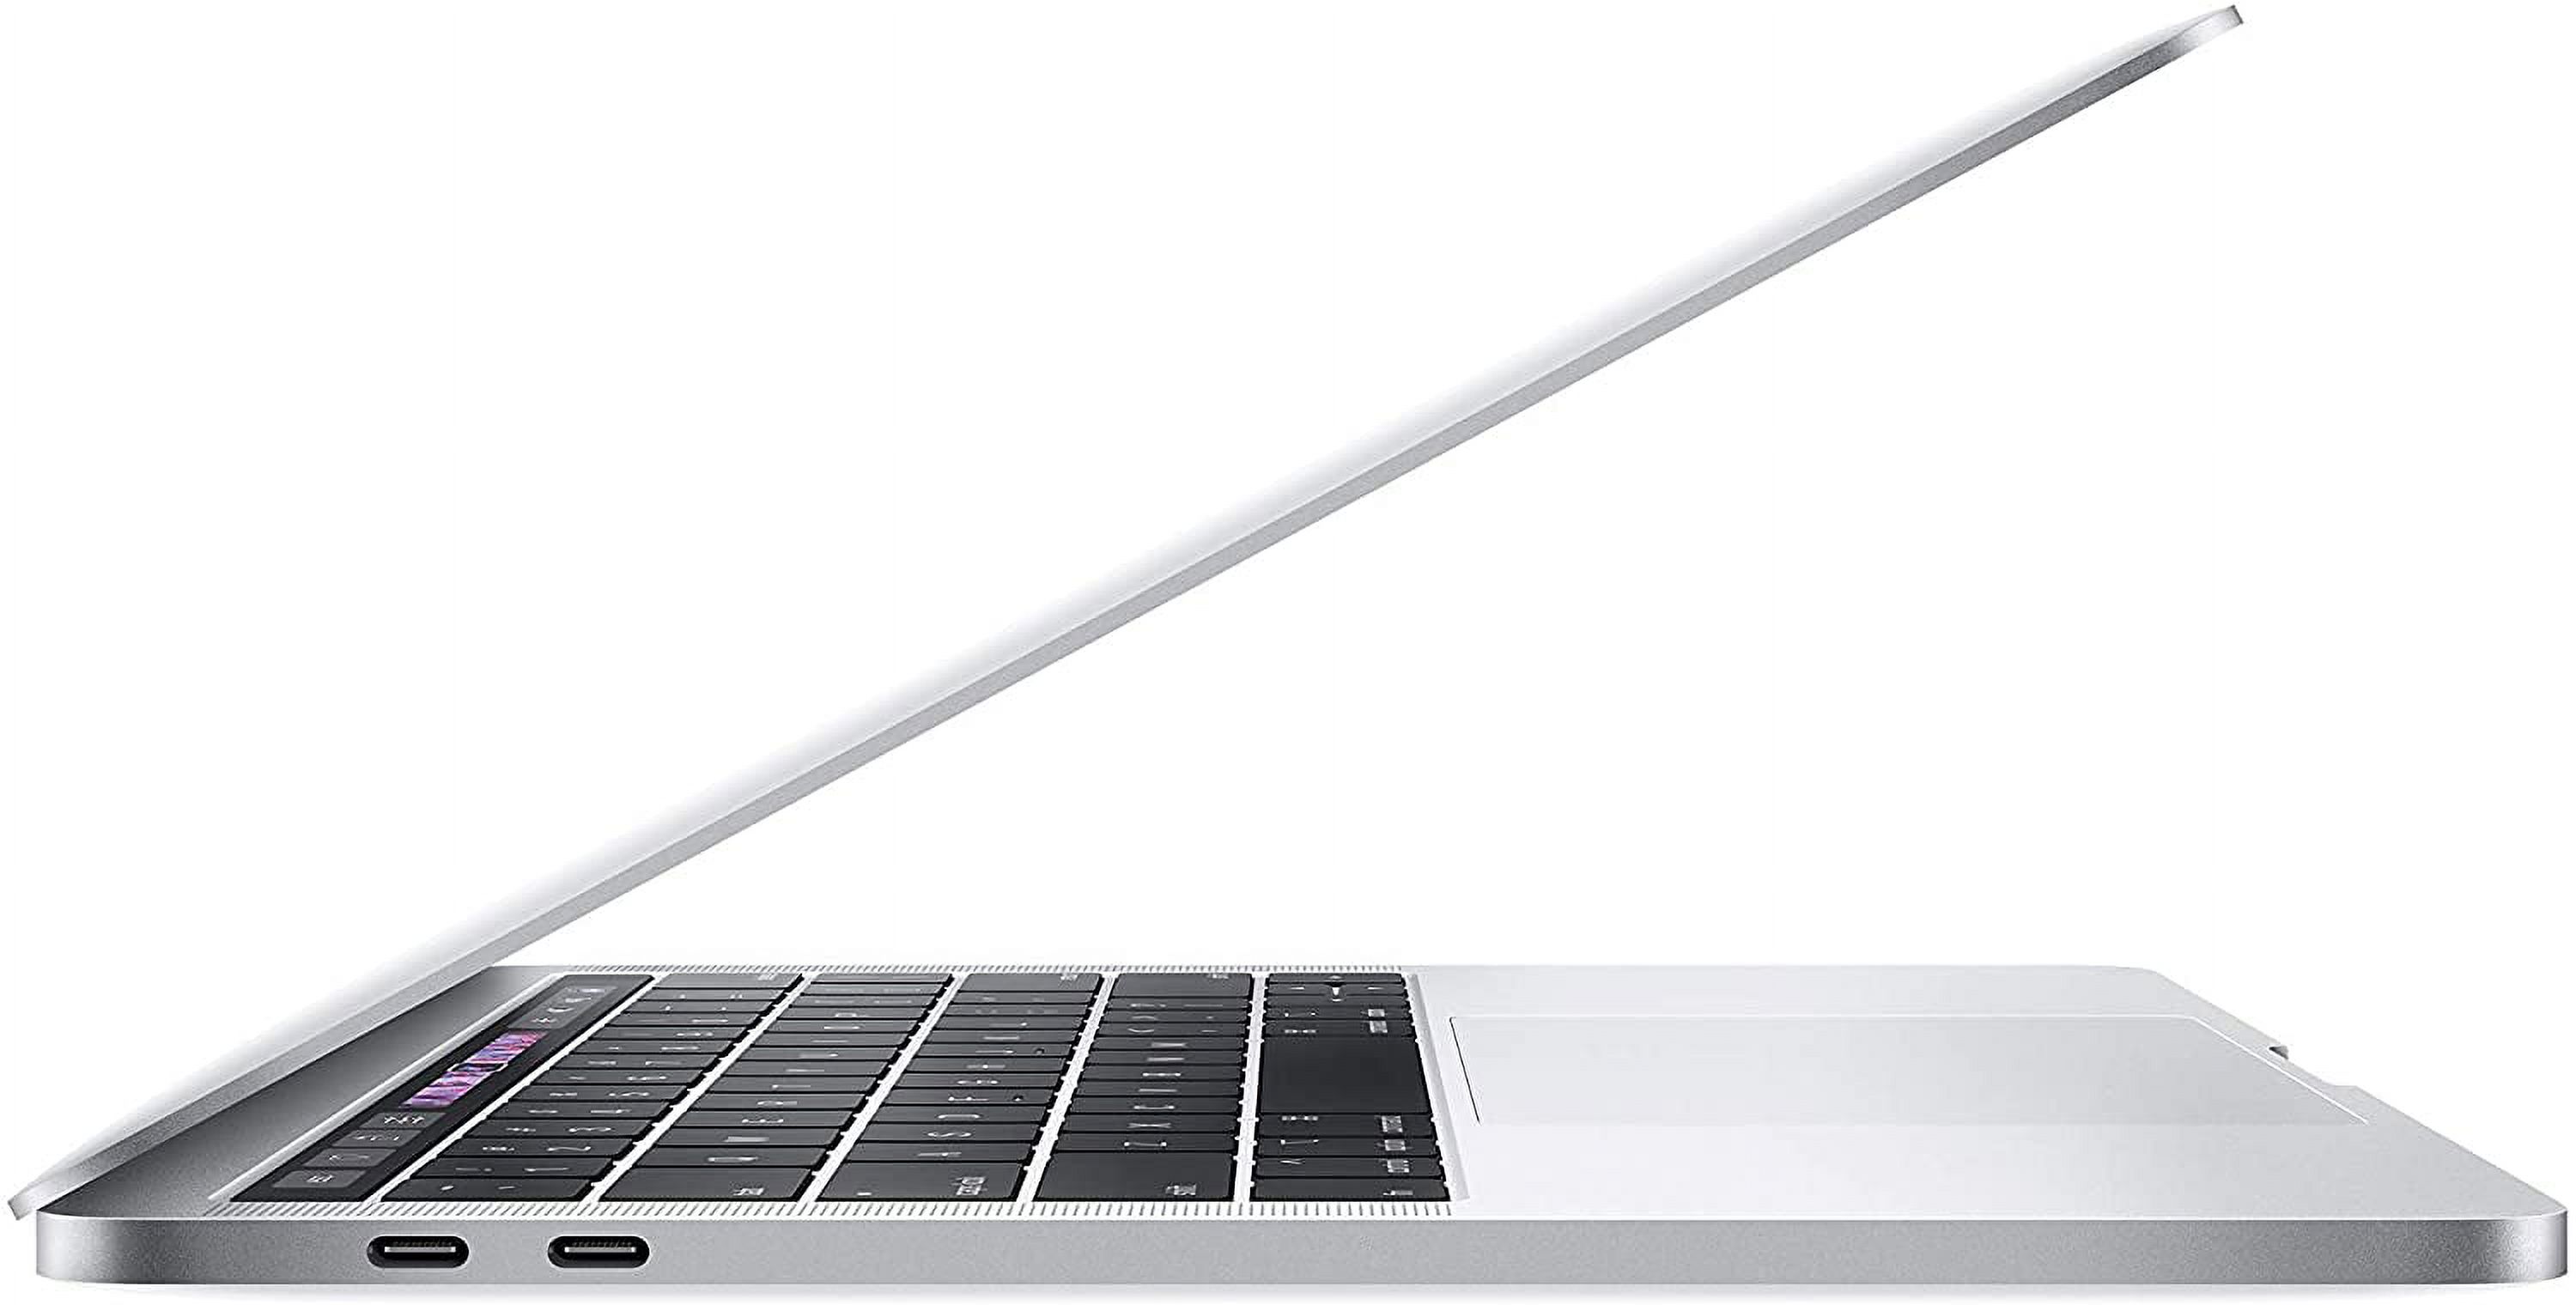 Restored Apple MacBook Pro MUHN2LL/A with 13.3" Intel Core i5 1.4GHz 8GB RAM Silver (Refurbished) - image 6 of 6